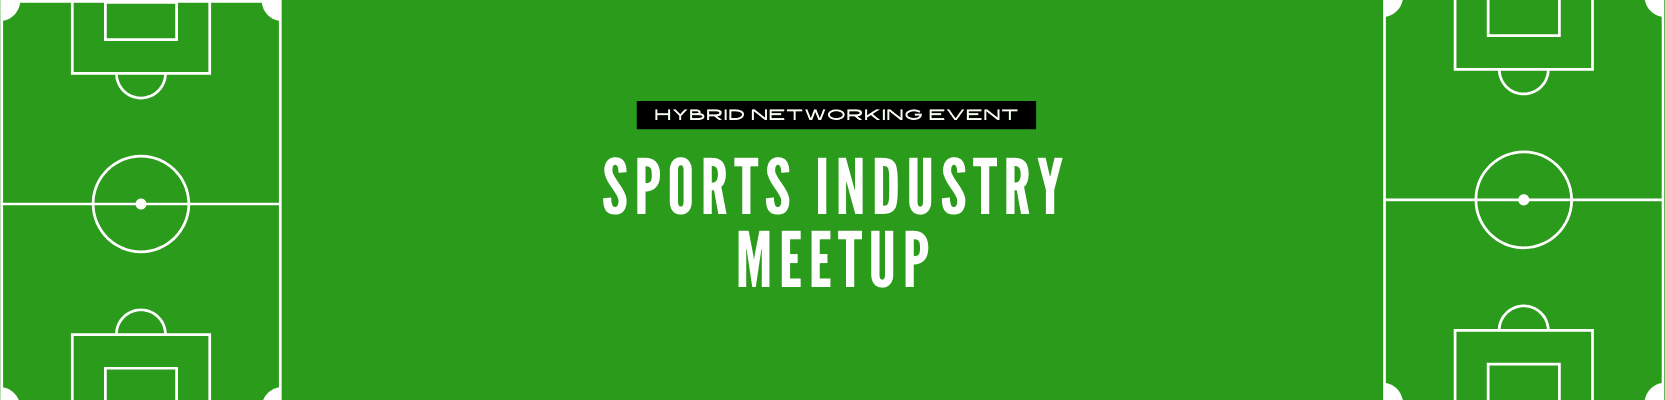 A green promotional image with white text that says, "Sports Industry Meeting".